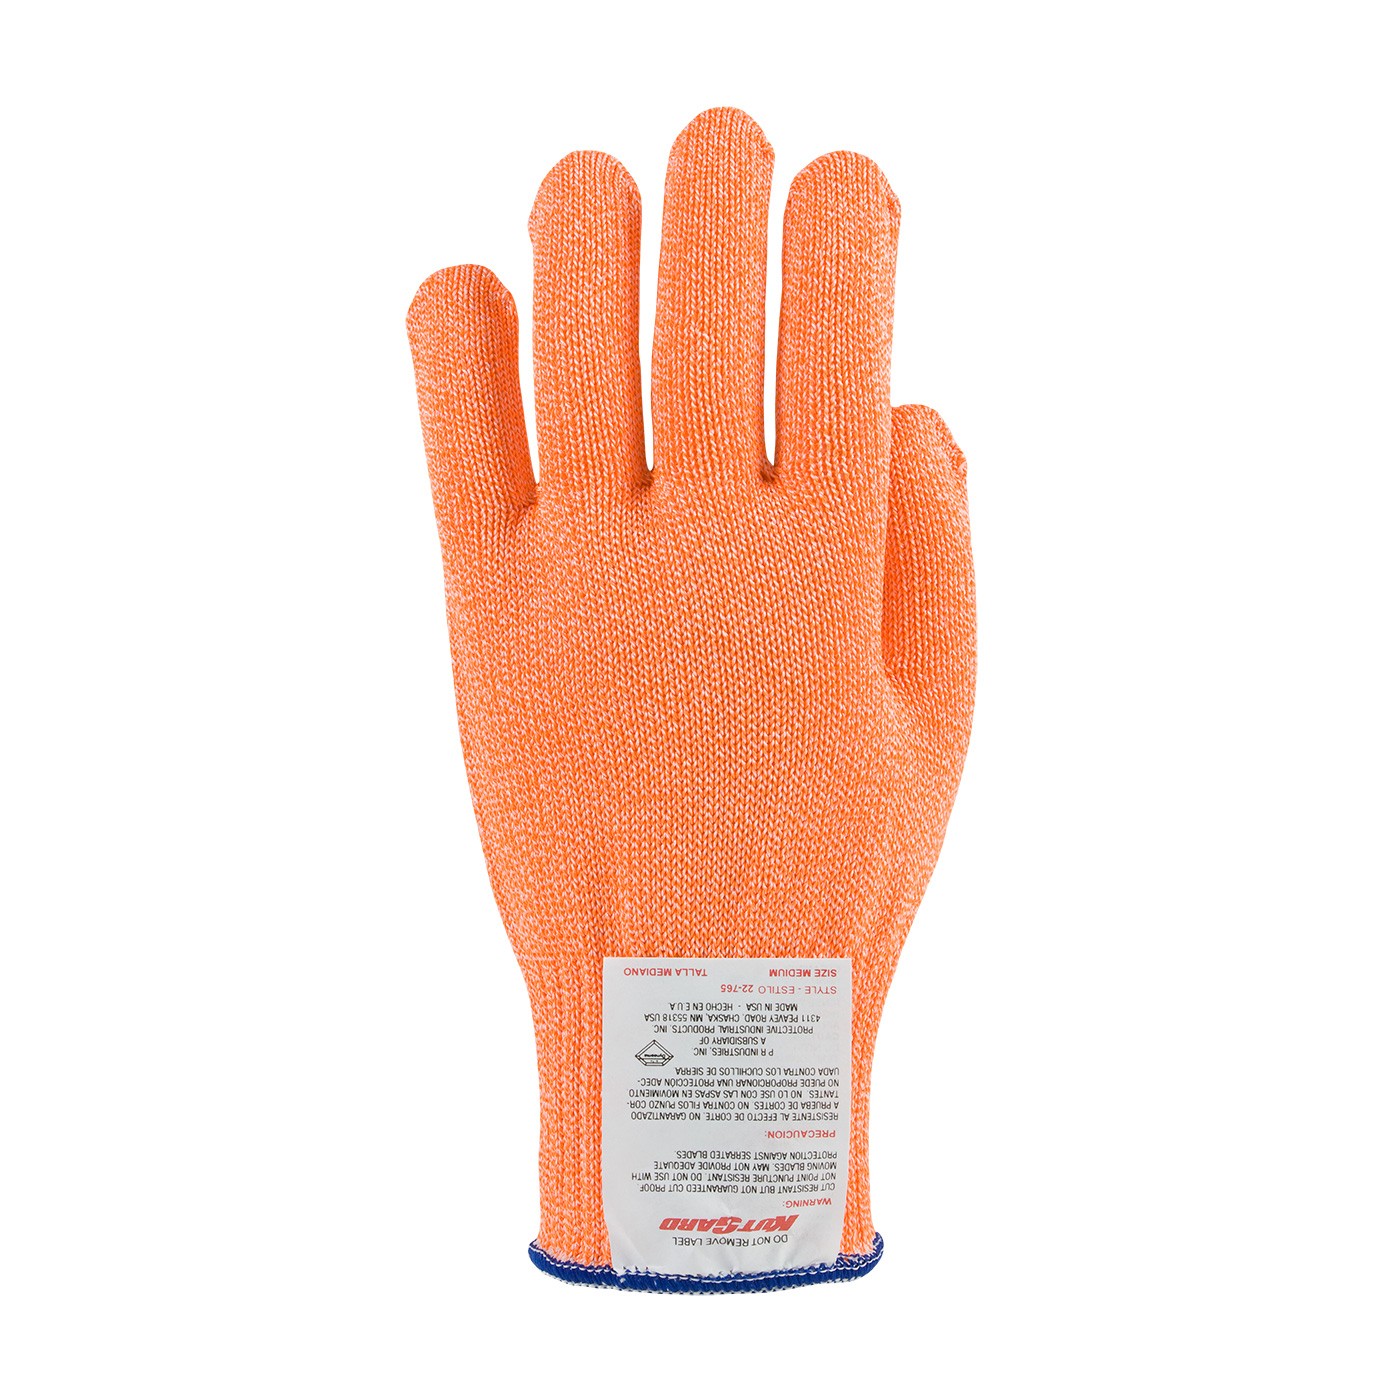 Kut Gard® Seamless Knit Dyneema® Blended Antimicrobial Glove - Medium Weight  (#22-765OR)